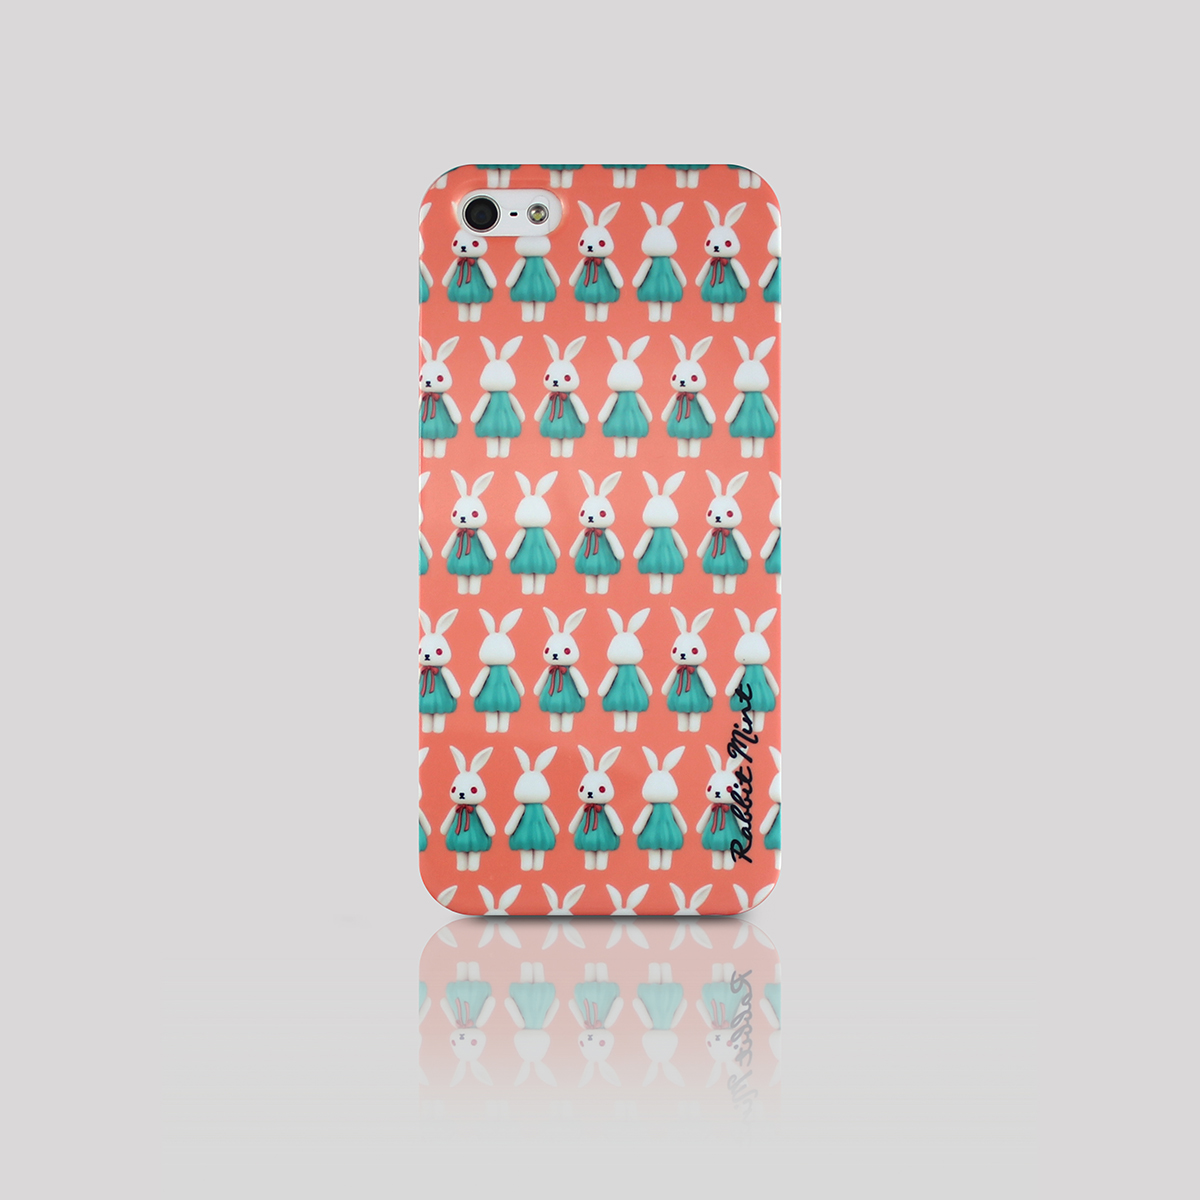 Iphone 5 / 5s Case - Merry Boo Pattern (m0011-ip5)